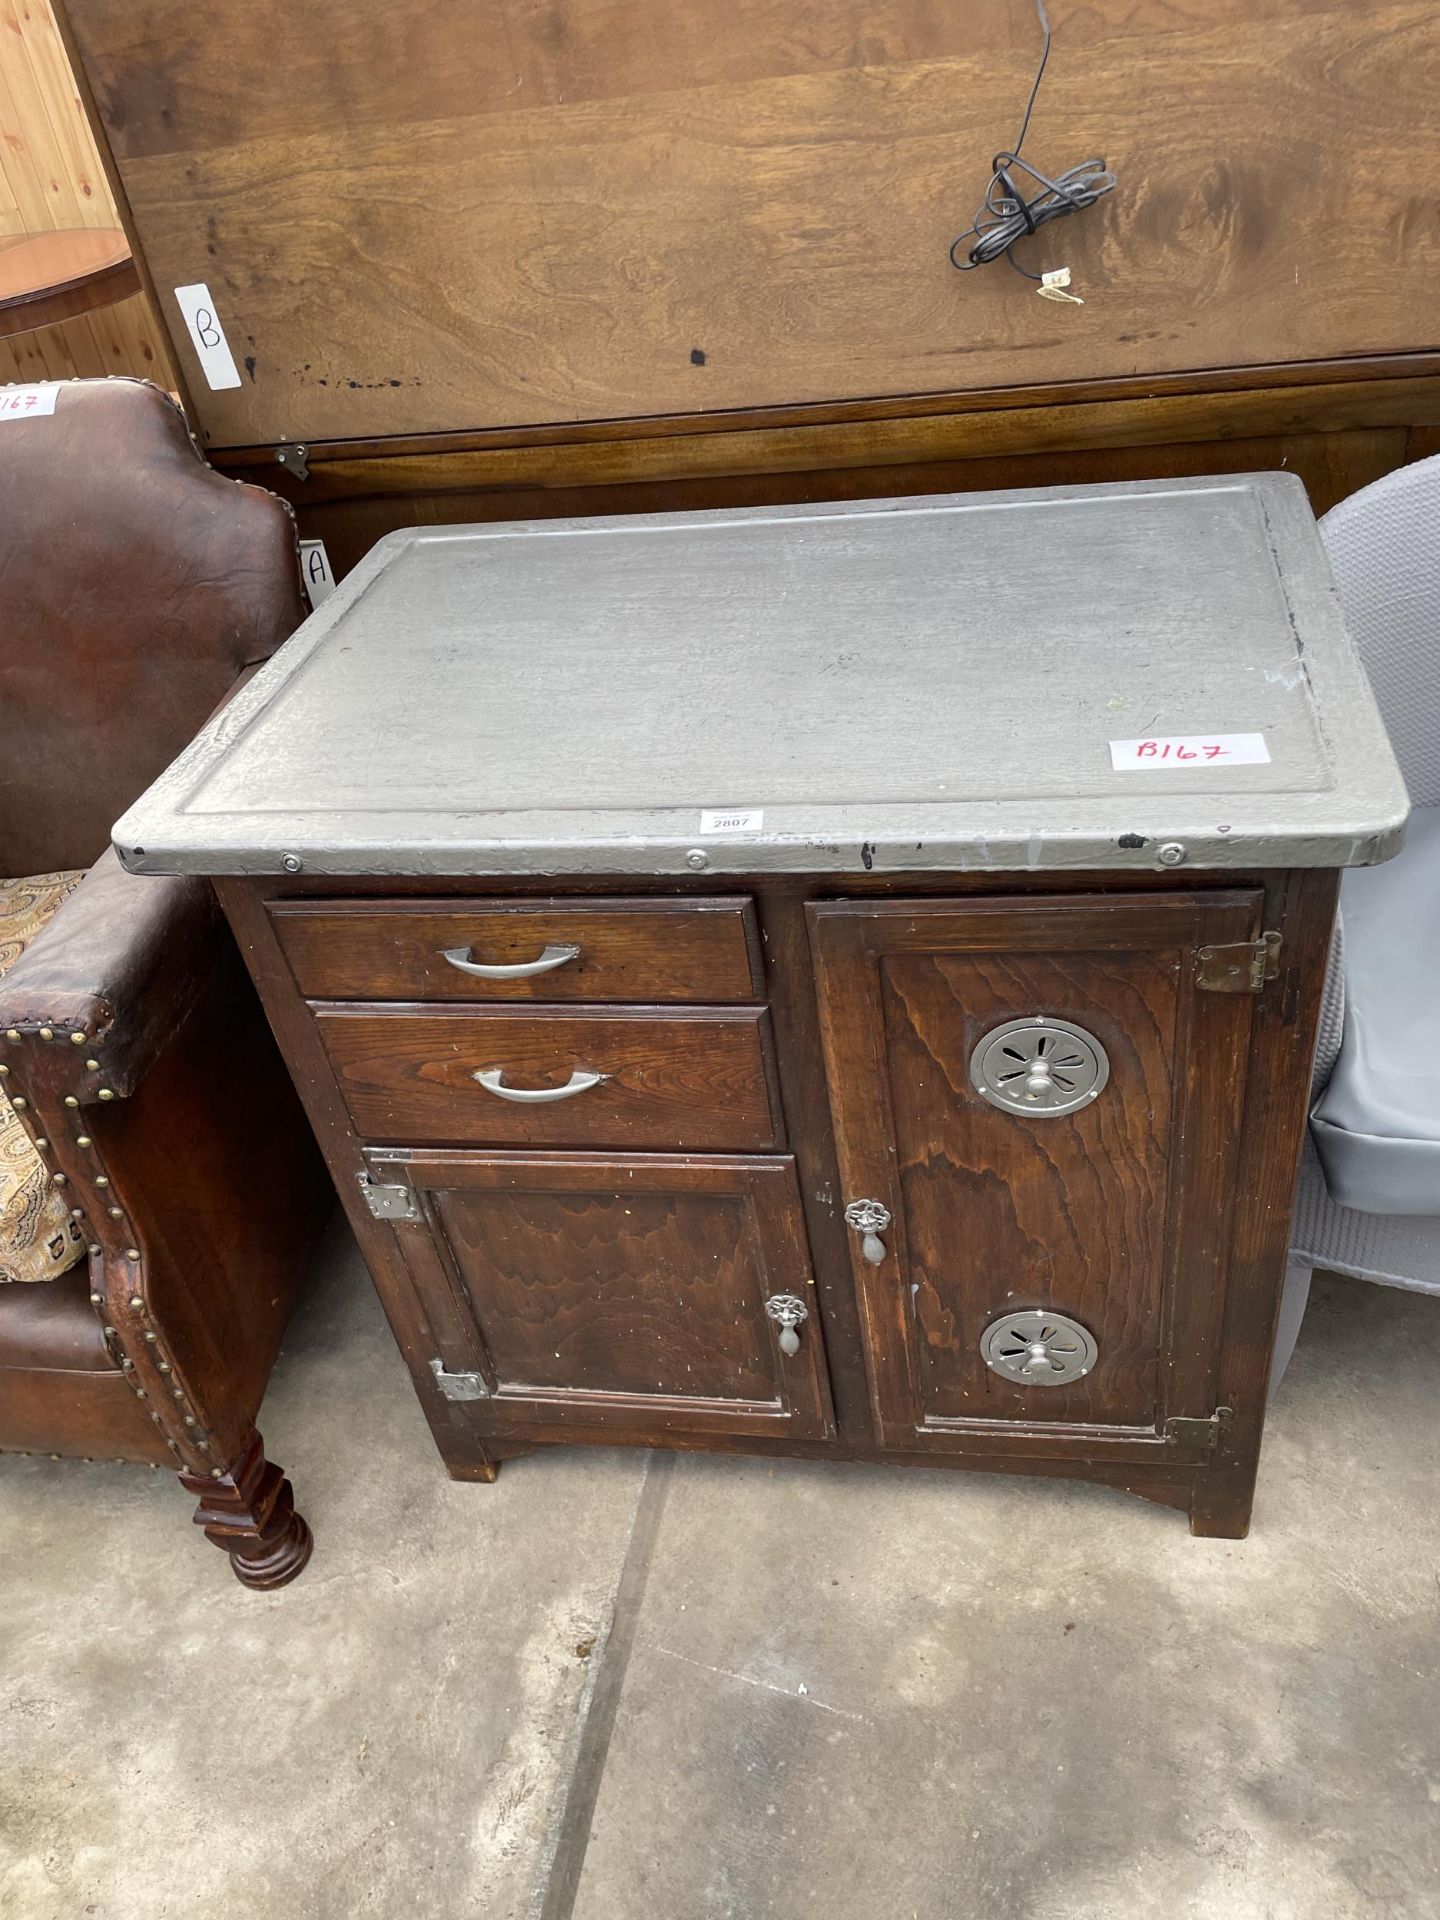 A MID 20TH CENTURY FOLD STORAGE CUPBOARD WITH METALWARE VENTS AND WORK TOP, 32" WIDE